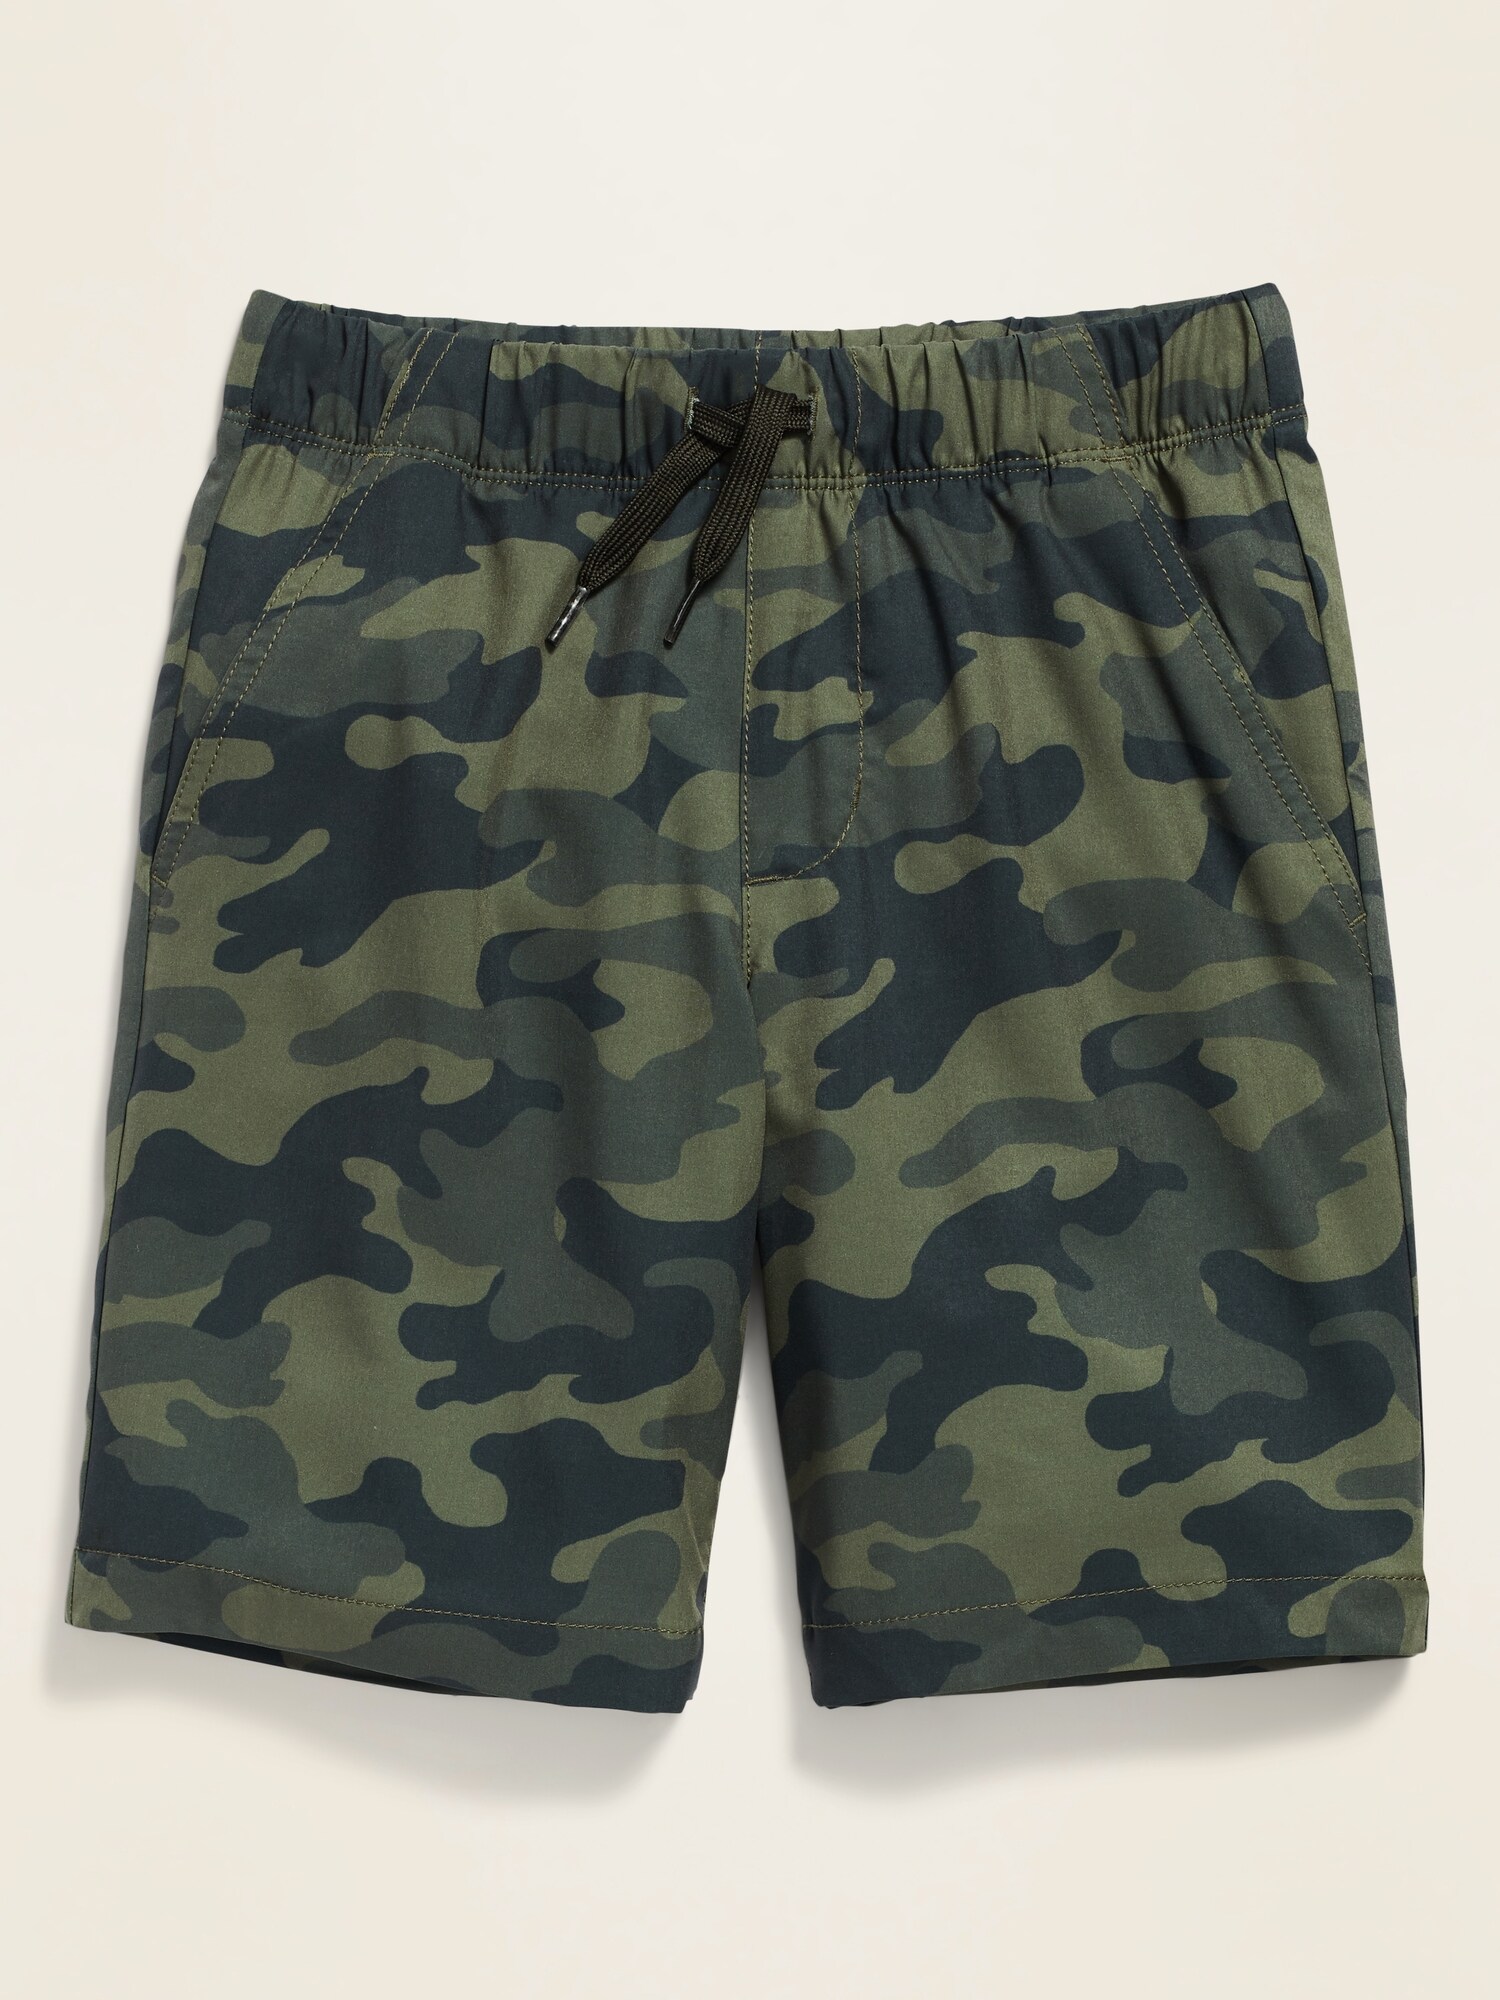 StretchTech Jogger Shorts for Boys